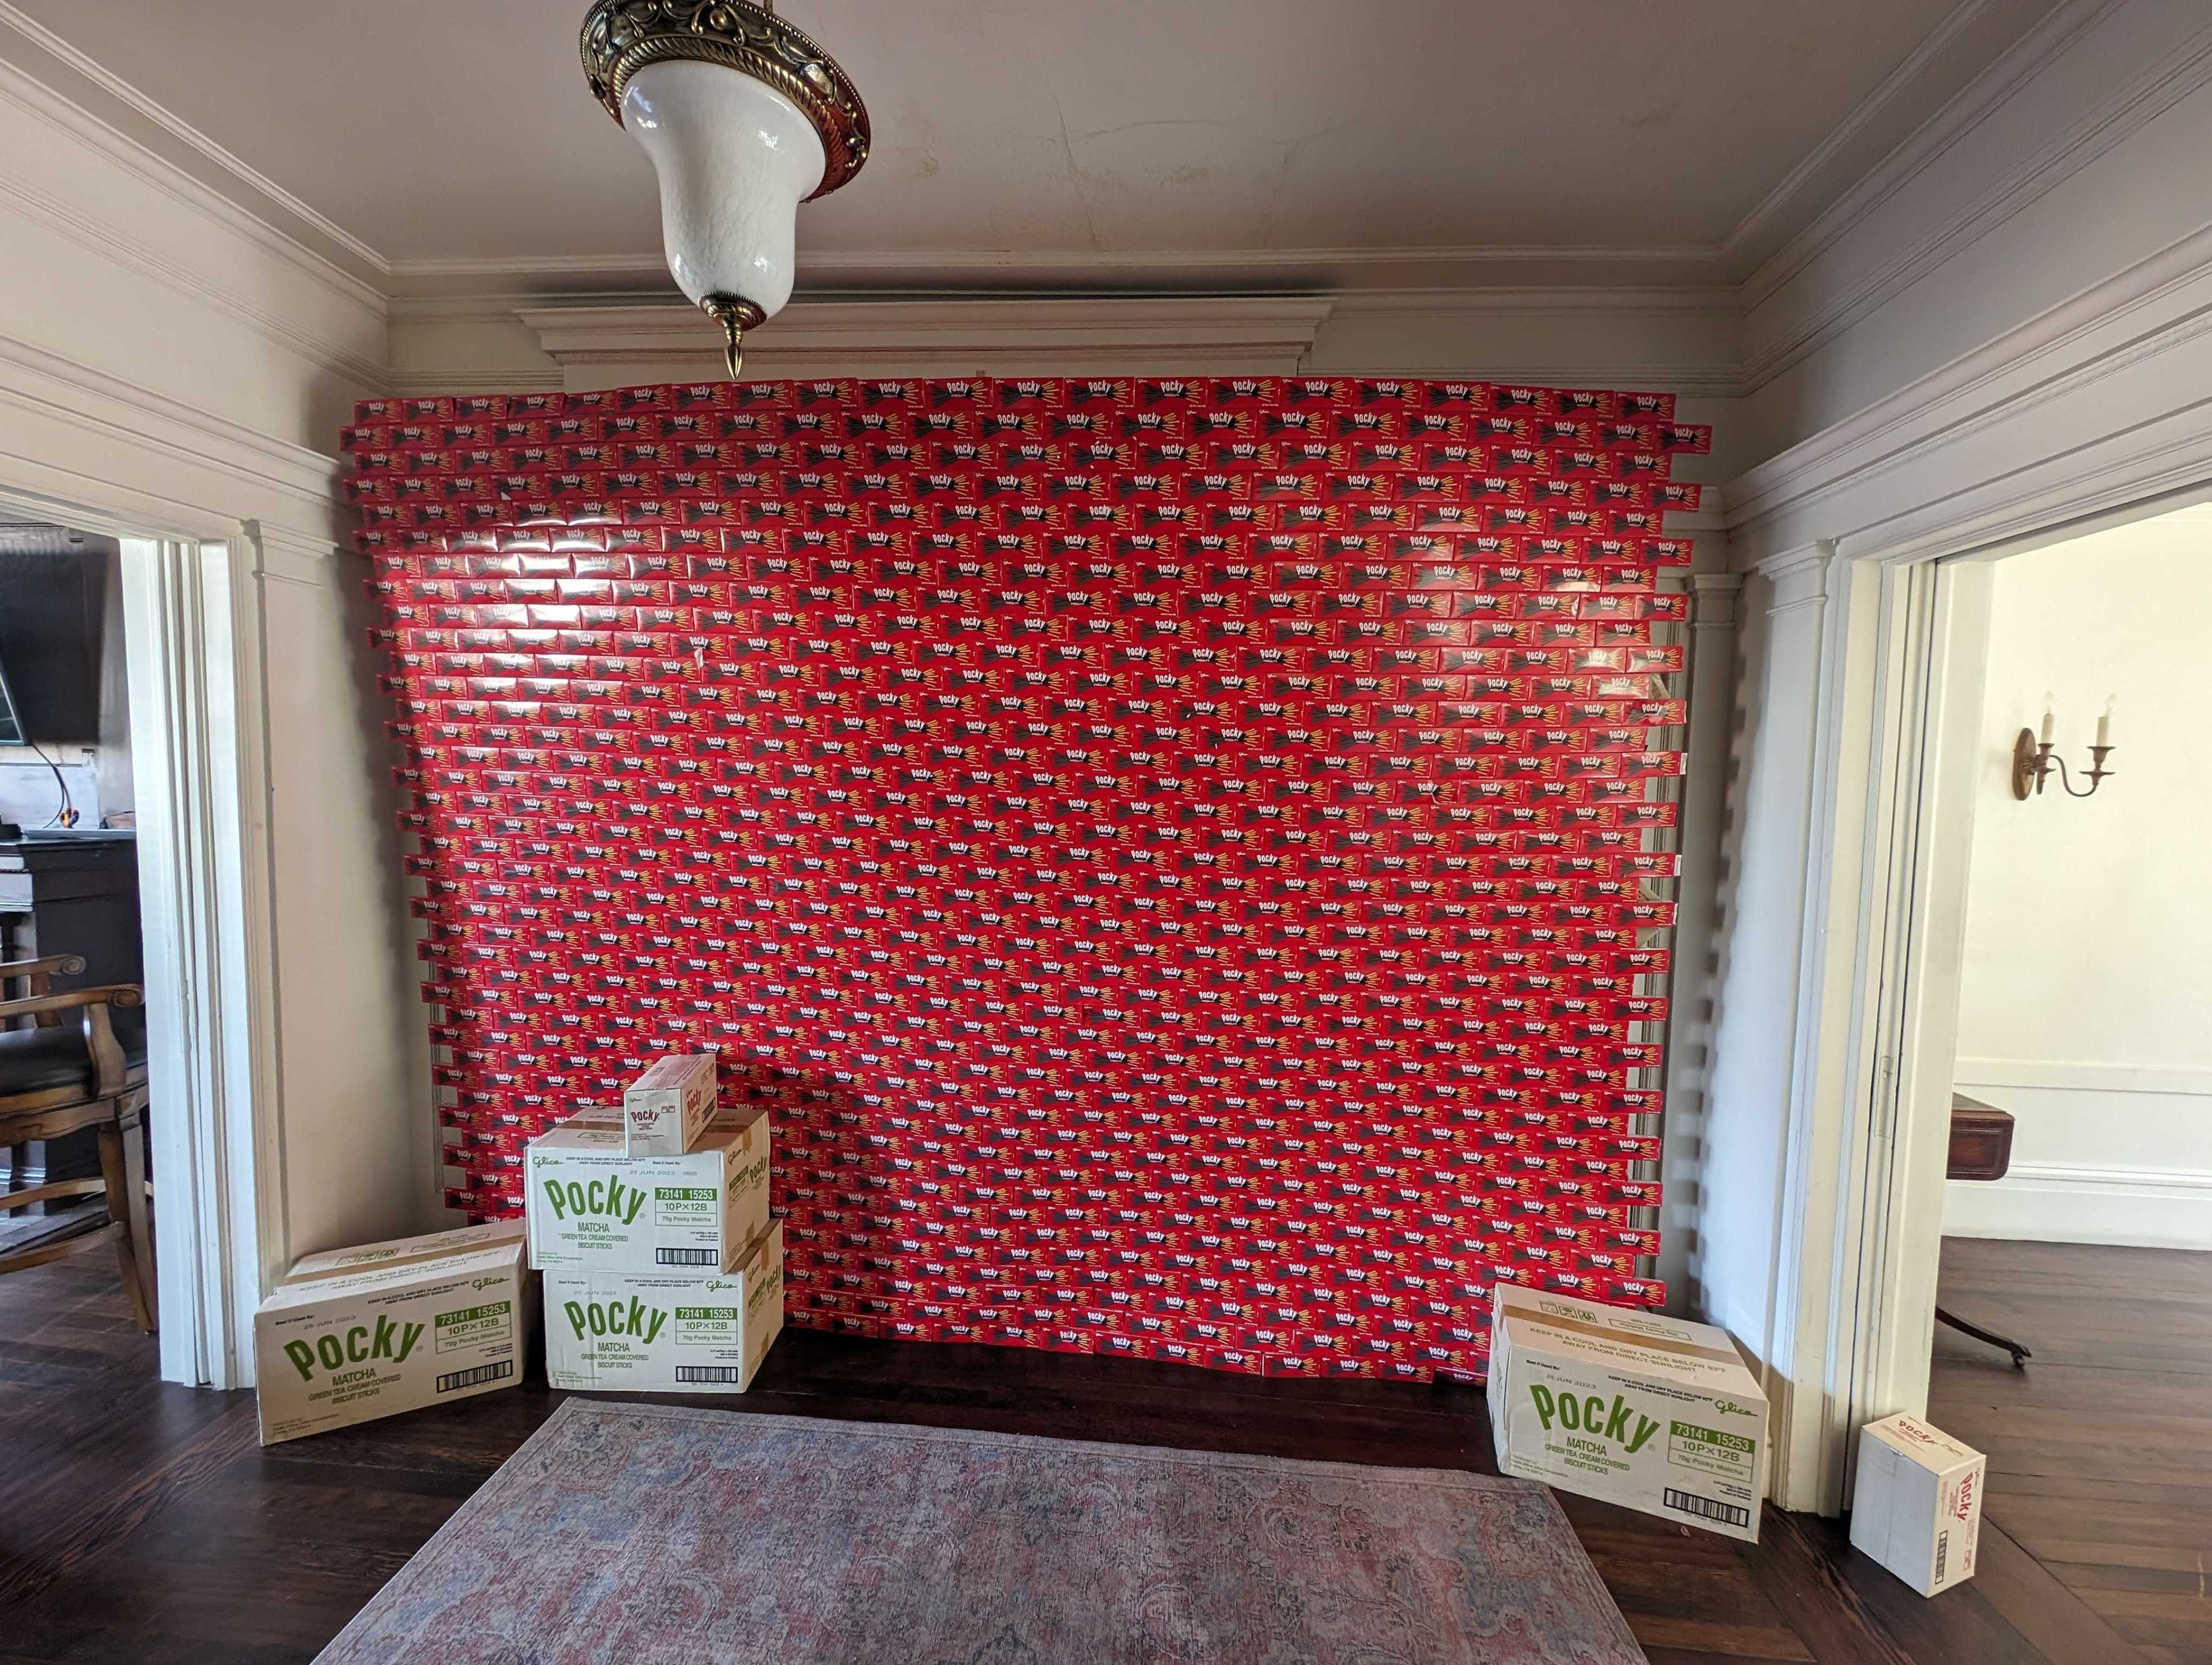 A display wall of empty chocolate-flavored Pocky cartons stands floor-to-ceiling in the lobby of a home, with several cardboard boxes of matcha-flavored Pocky at its base.